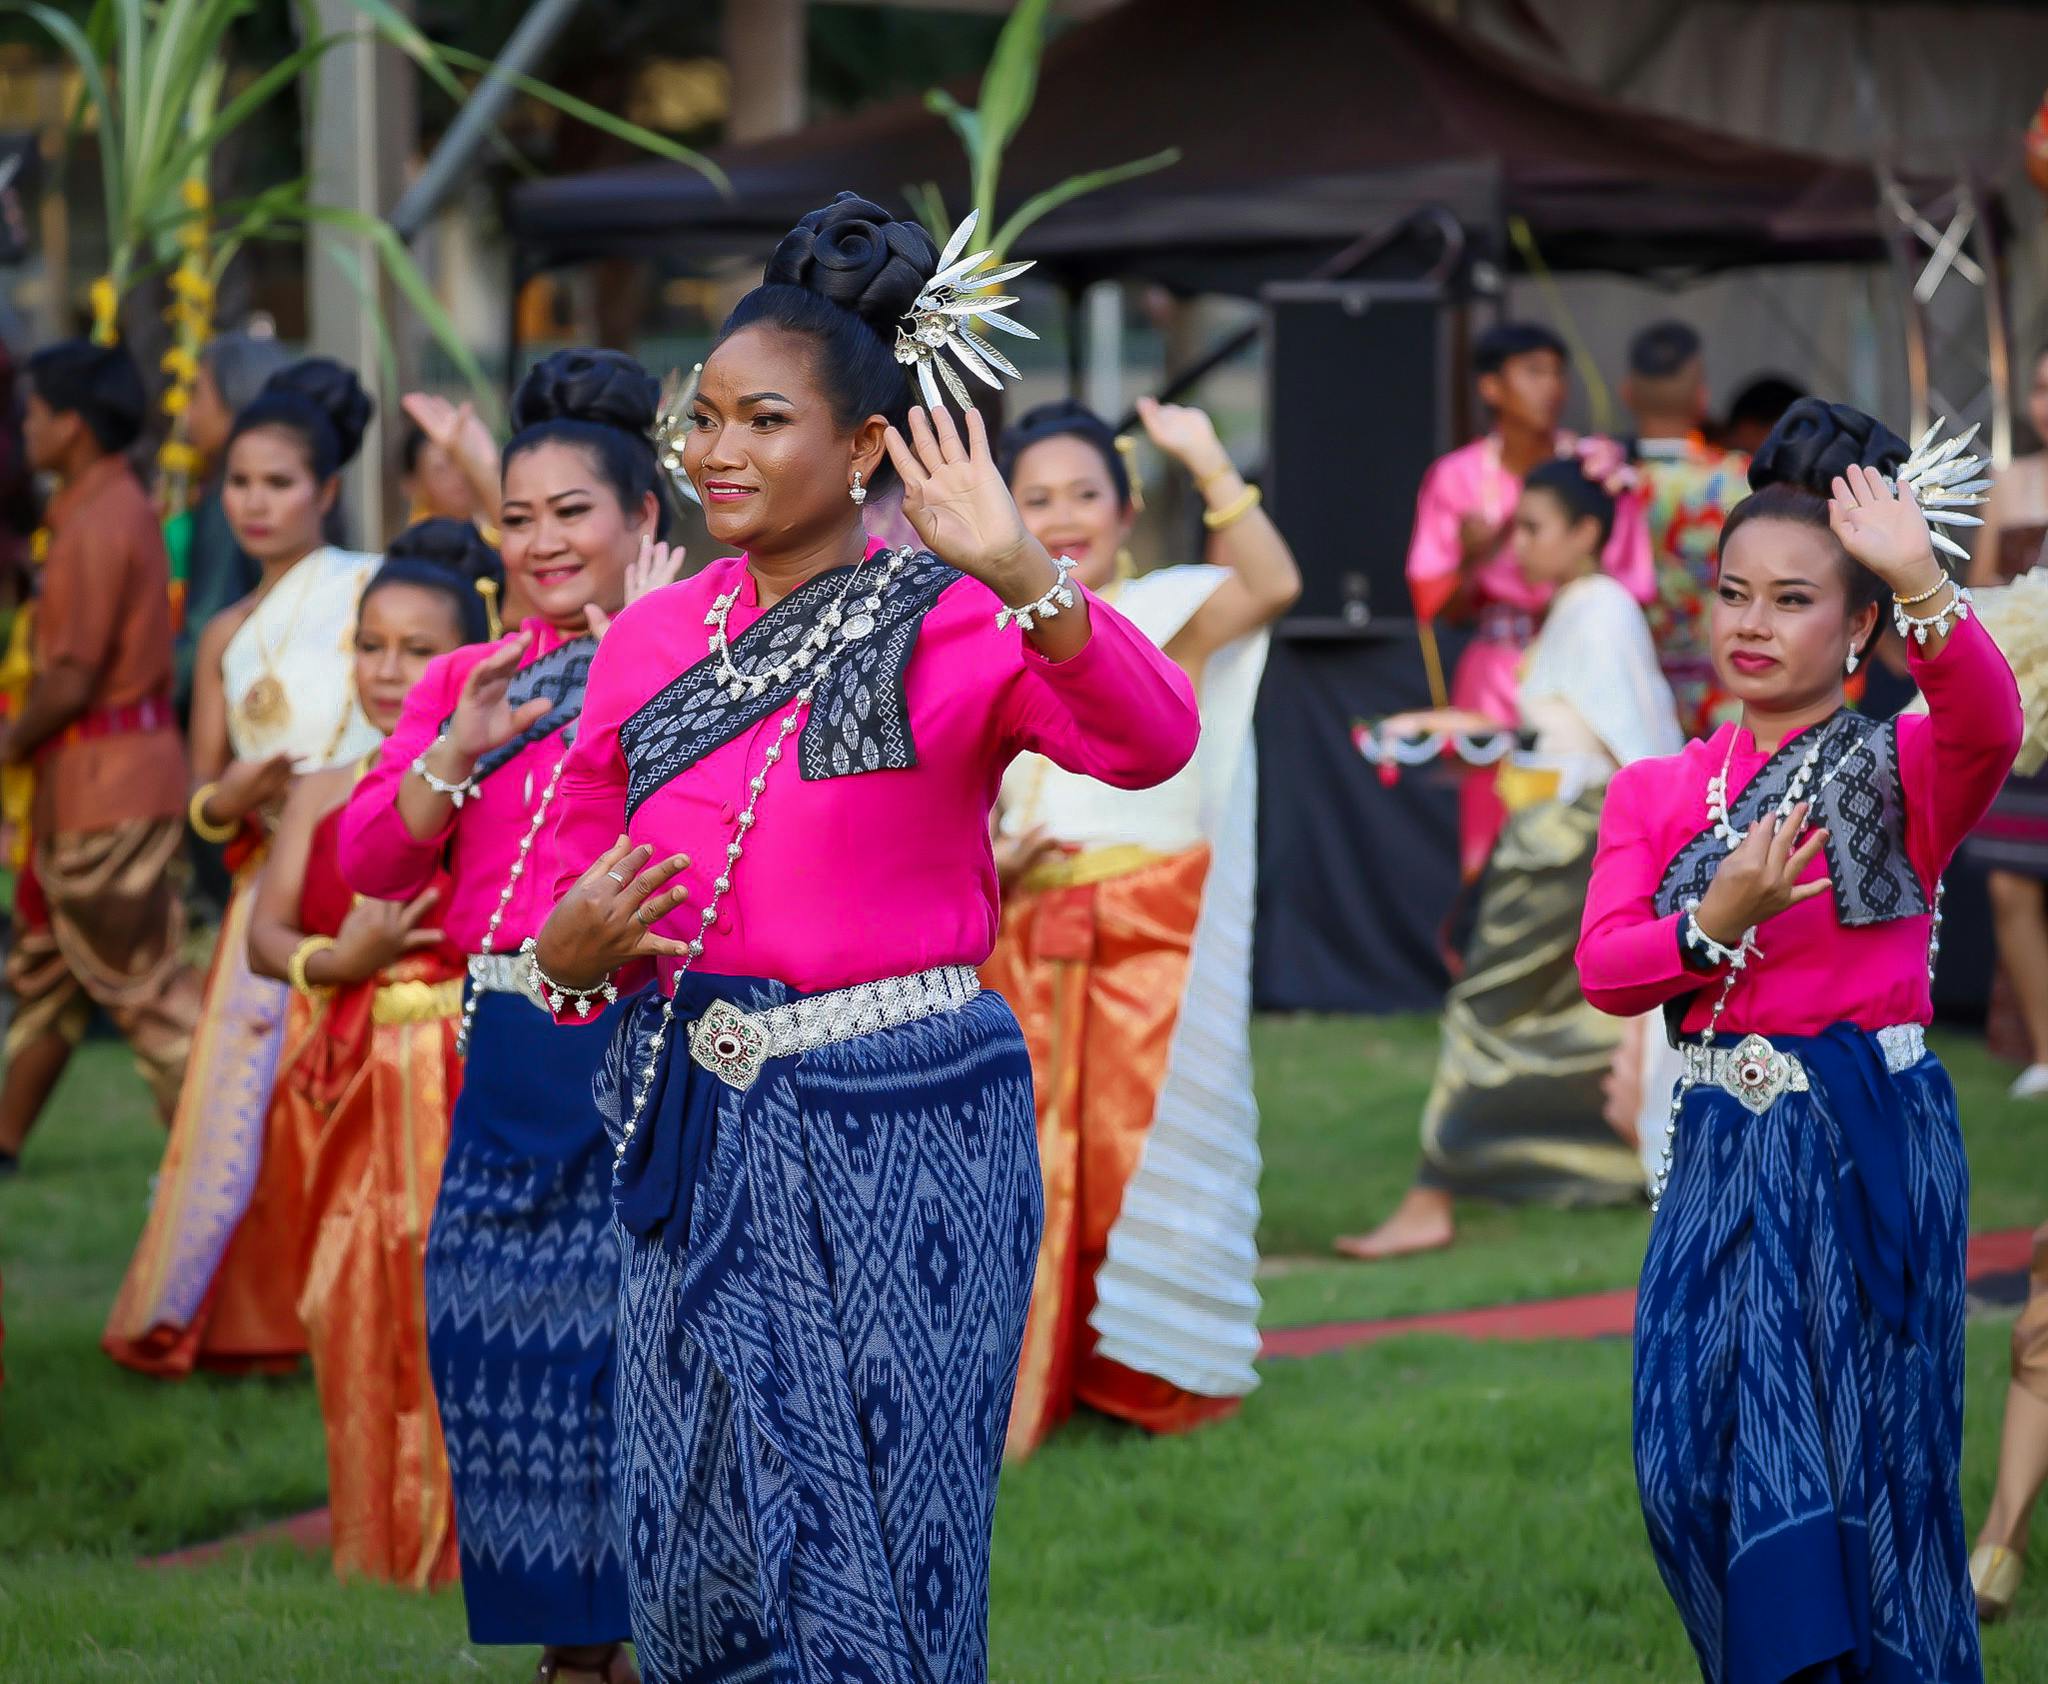 The Thailand Grand Festival returns to Darwin this weekend.